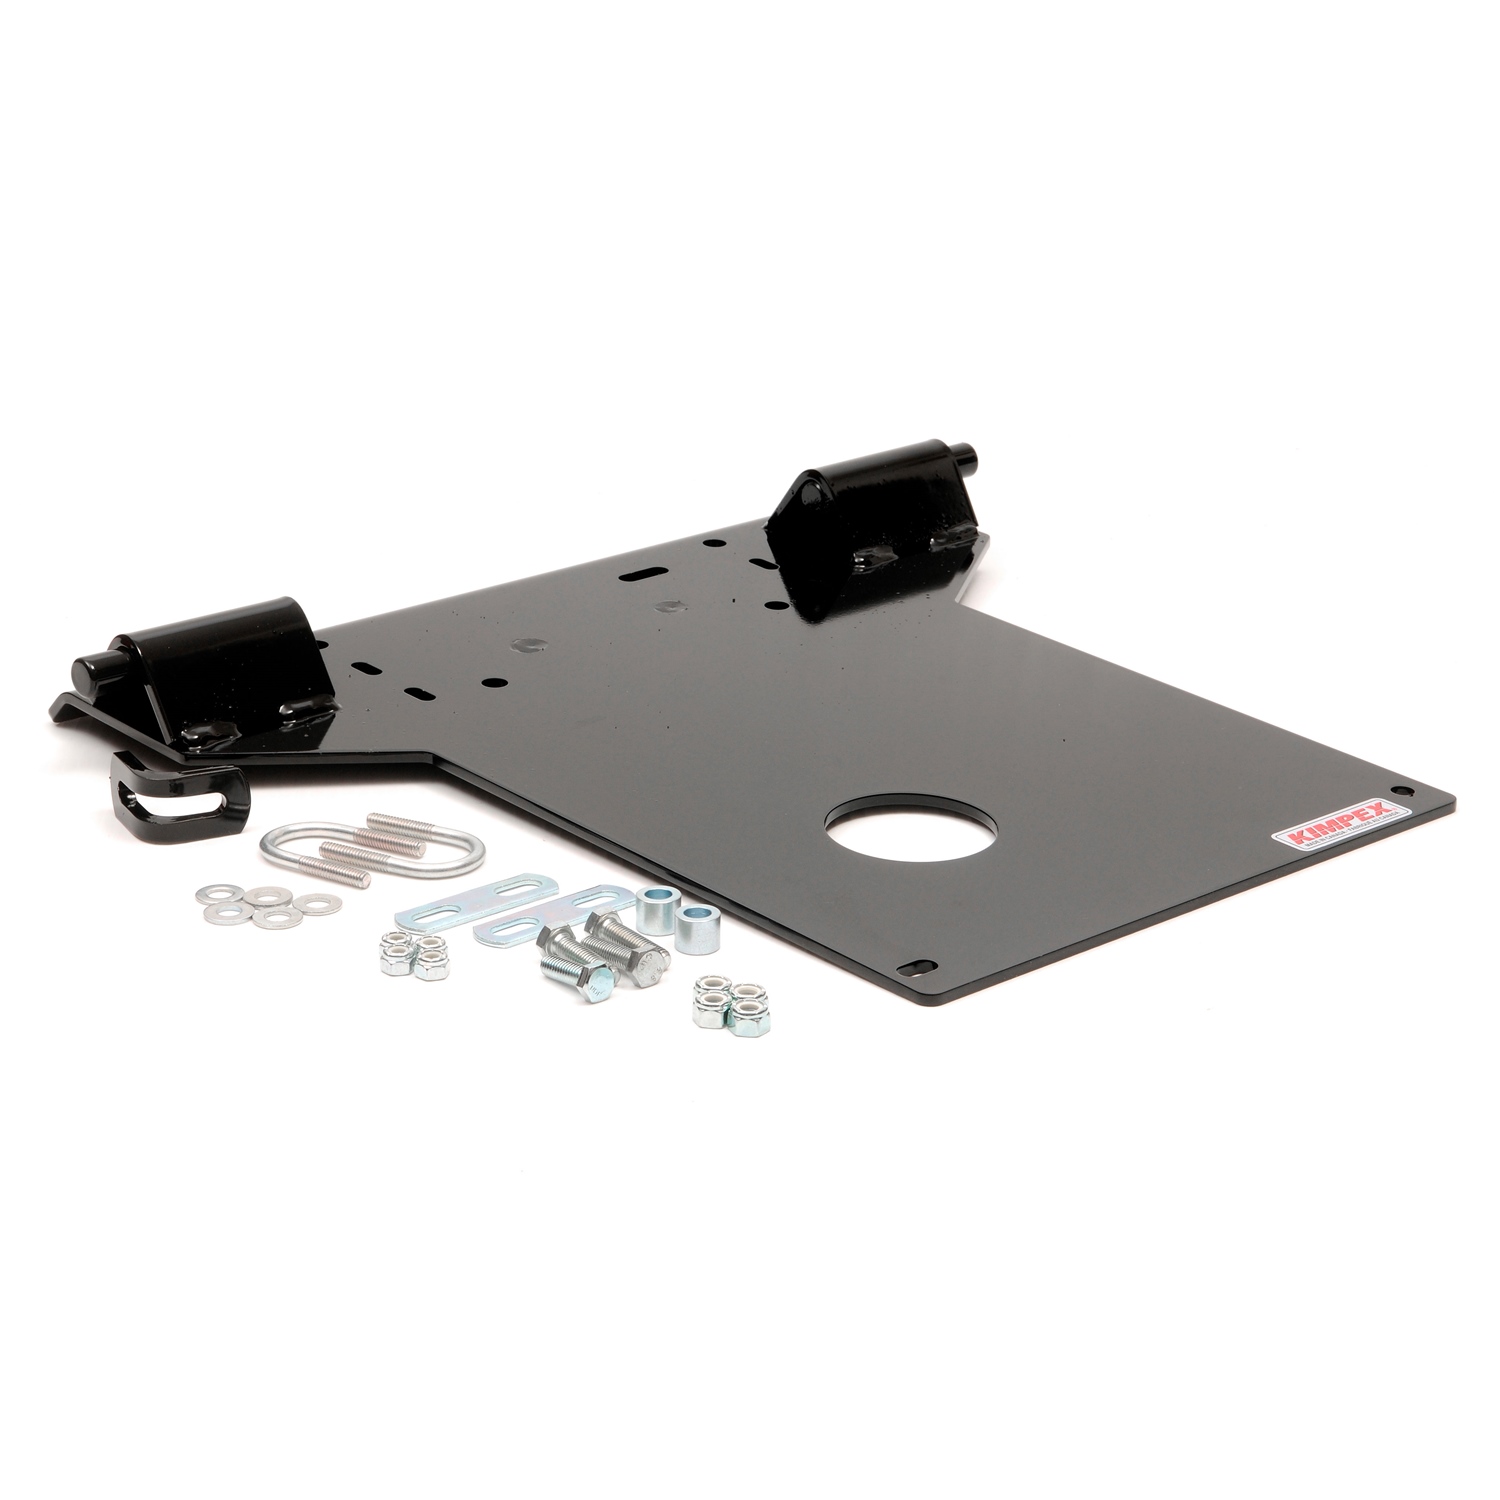 CLICK-N-GO CNG 1 Snow Plow Bracket | Kimpex USA